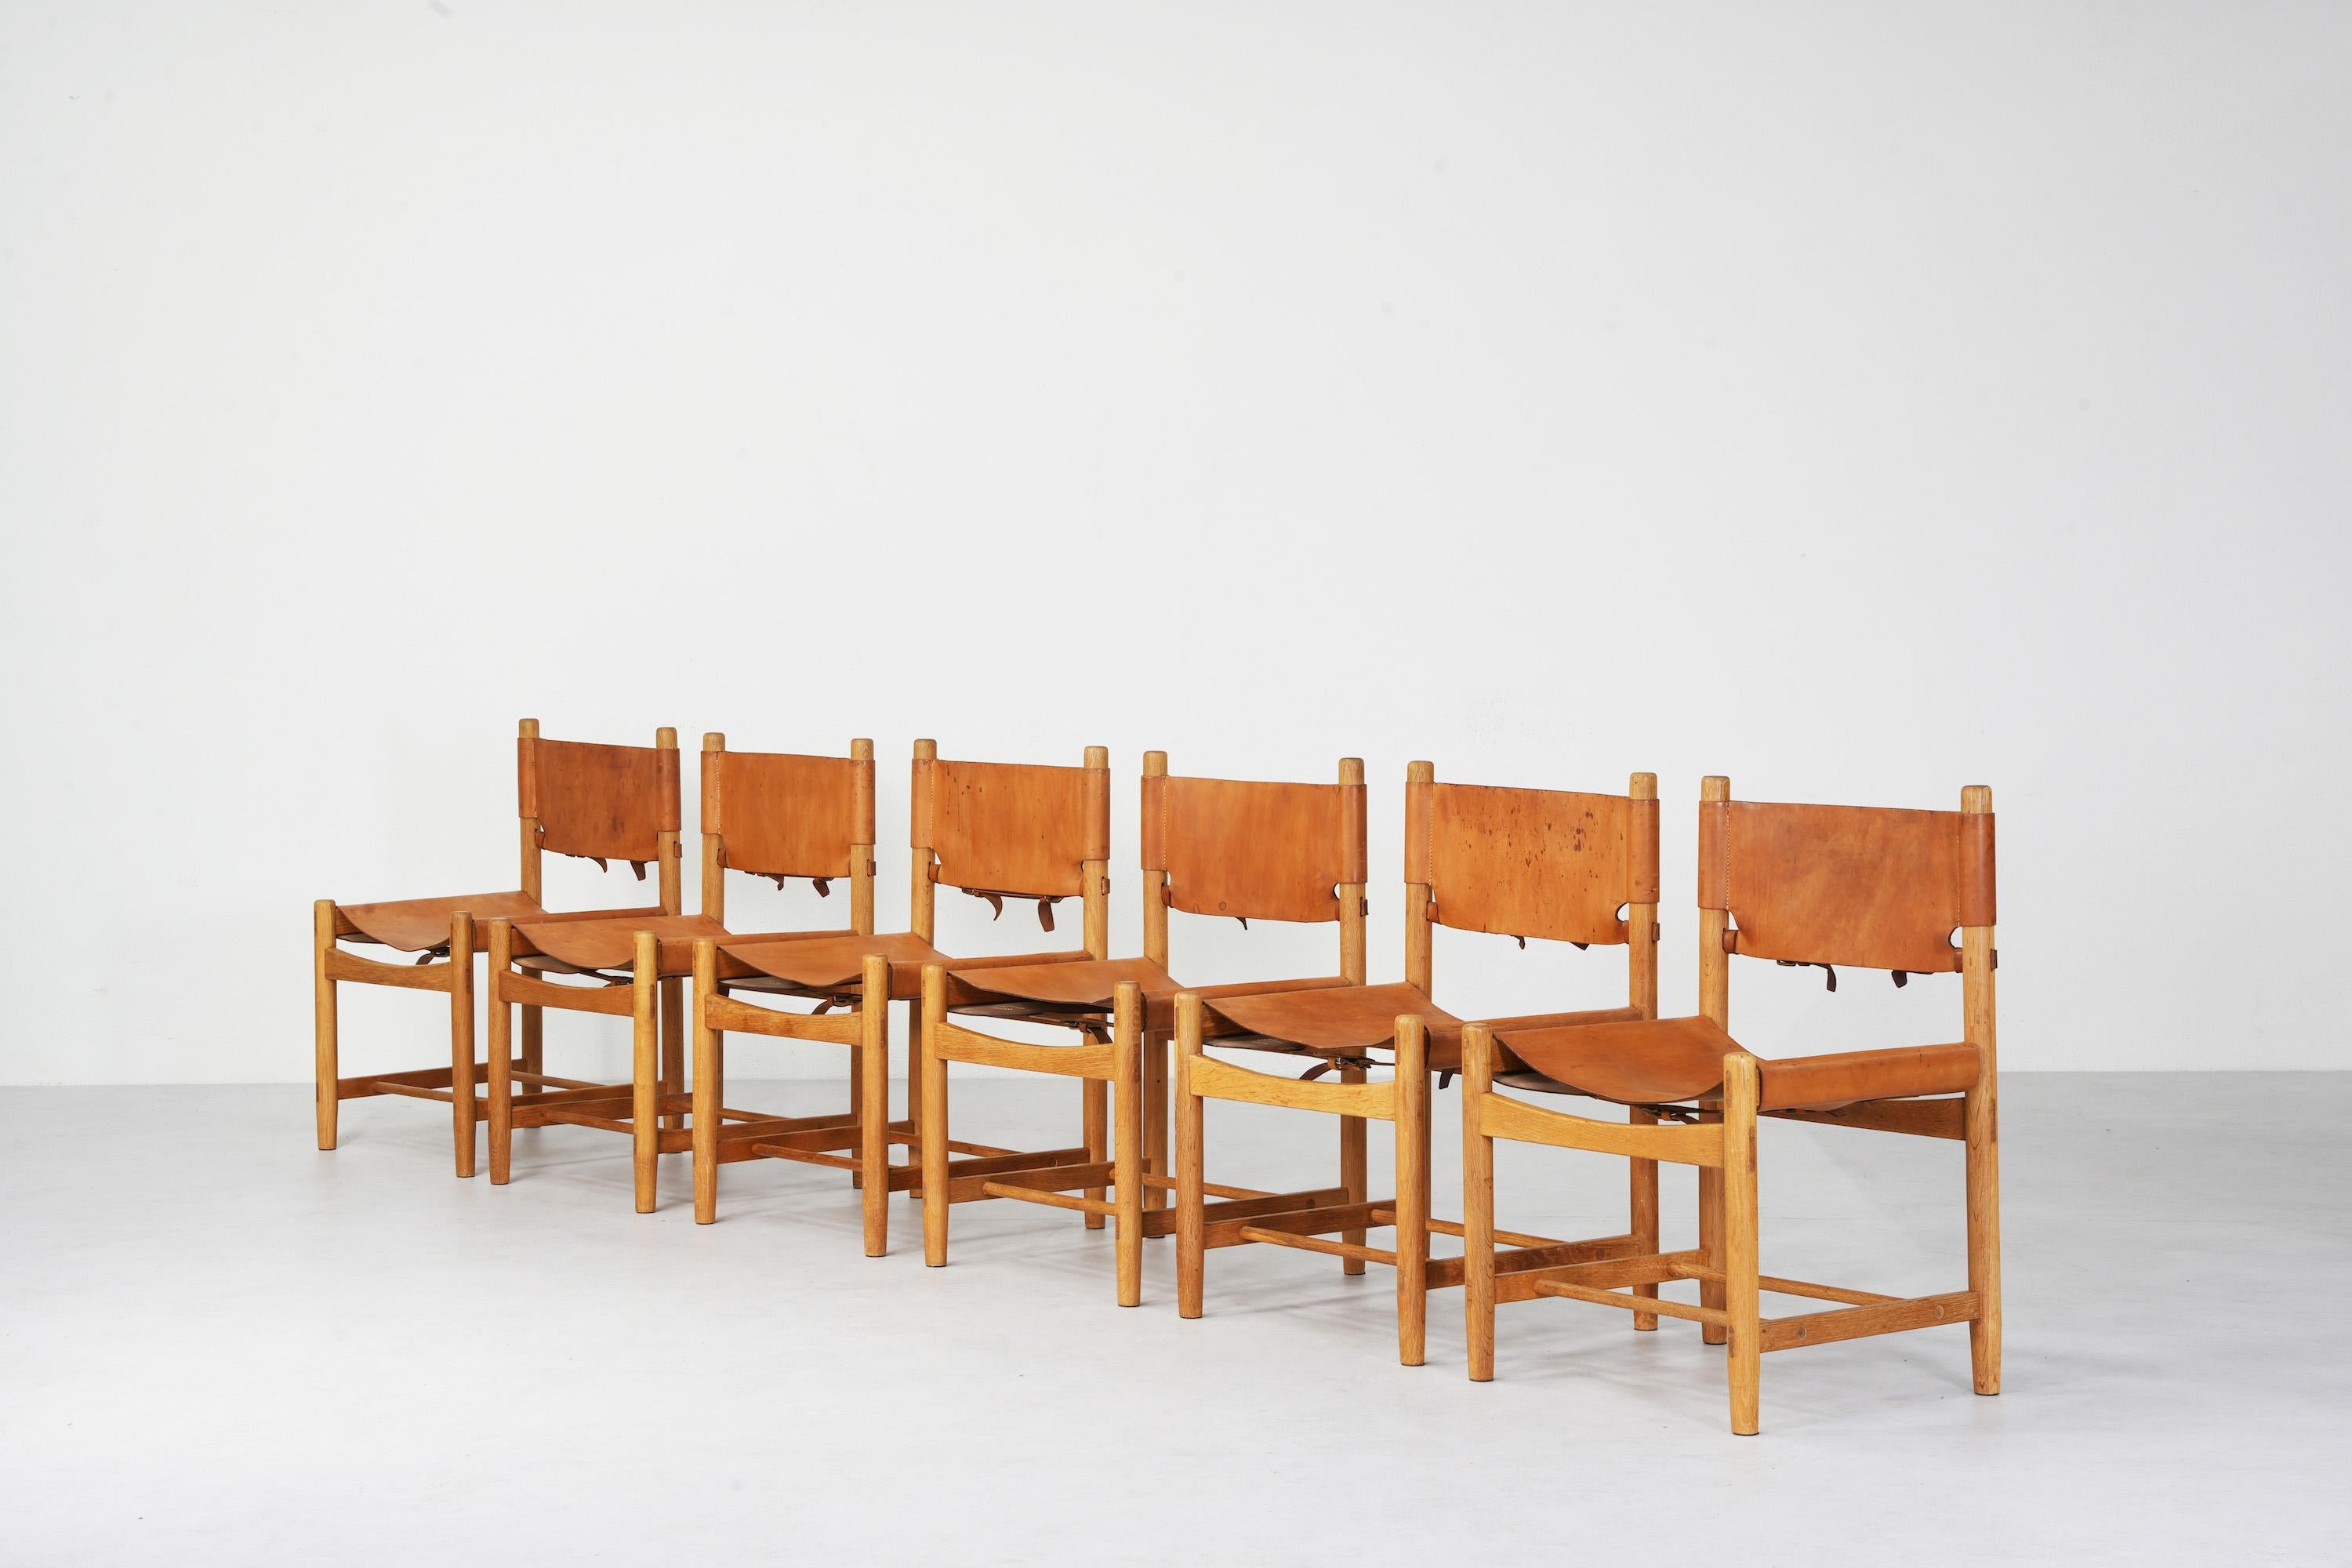 Beautiful set of six 'Hunting' chairs, probably the oldest version of model no. 3237 and attributed to Børge Mogensen and Fredericia Furniture, Denmark. 
All six chairs come with great patinated leather in brown cognac and a beautifully aged oak